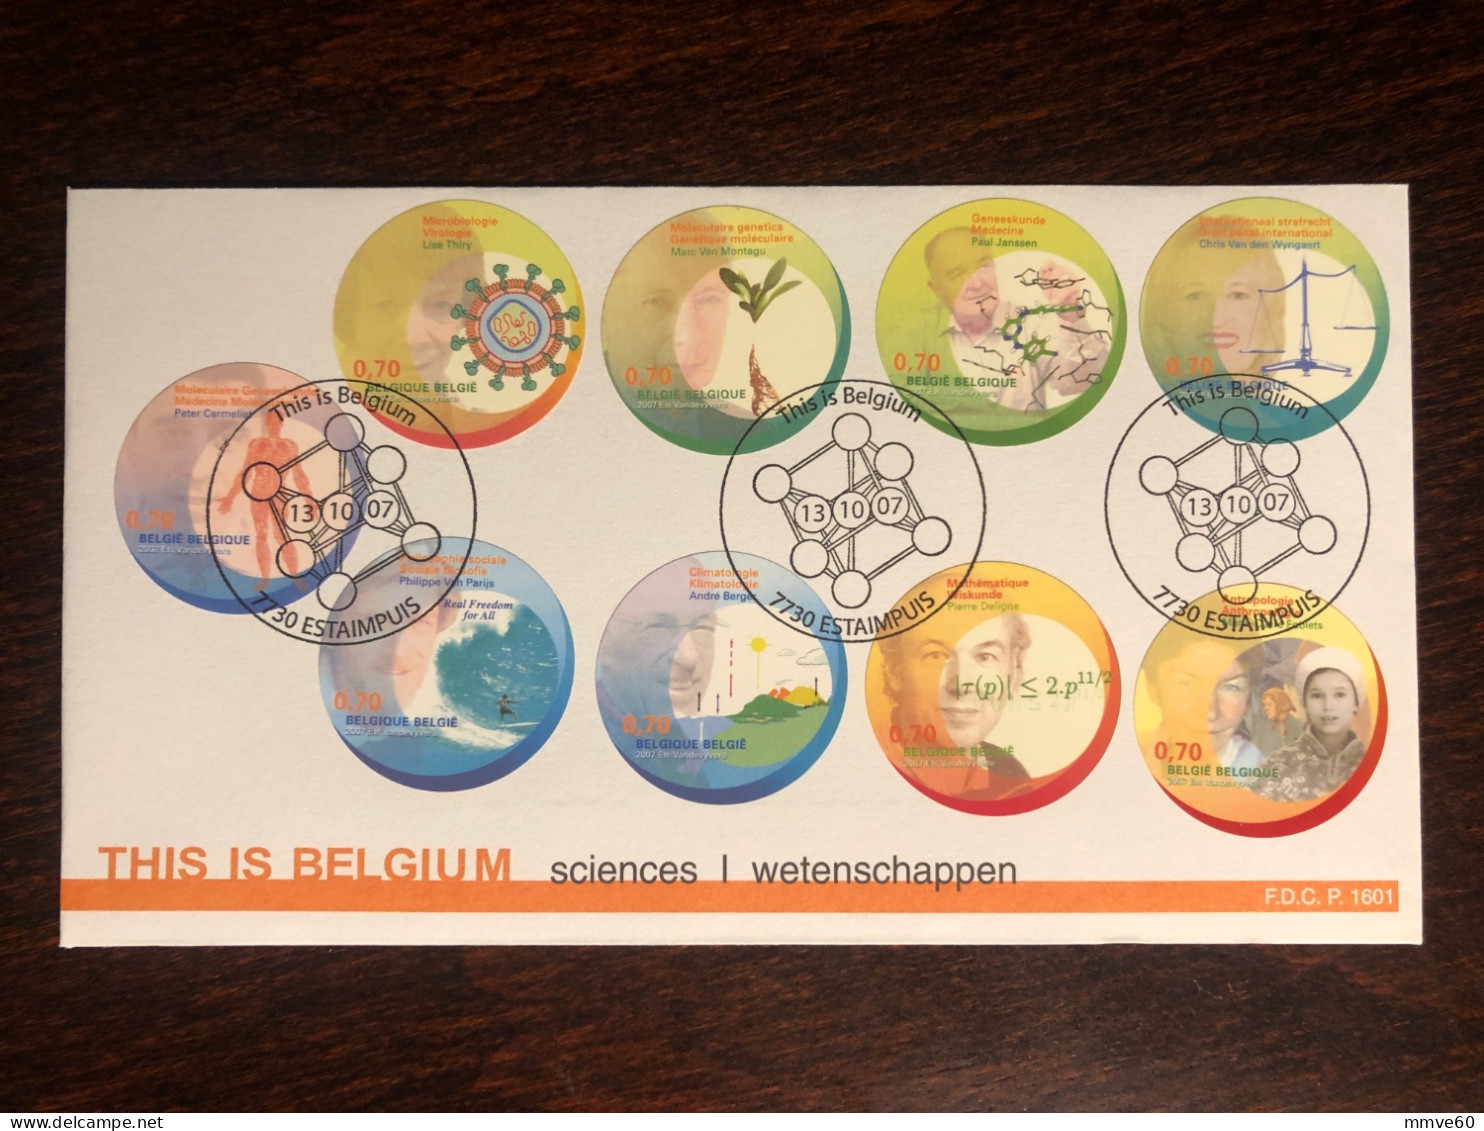 BELGIUM FDC COVER 2007 YEAR SCIENCES GENETICS MICROBIOLOGY VIROLOGY HEALTH MEDICINE STAMPS - Covers & Documents